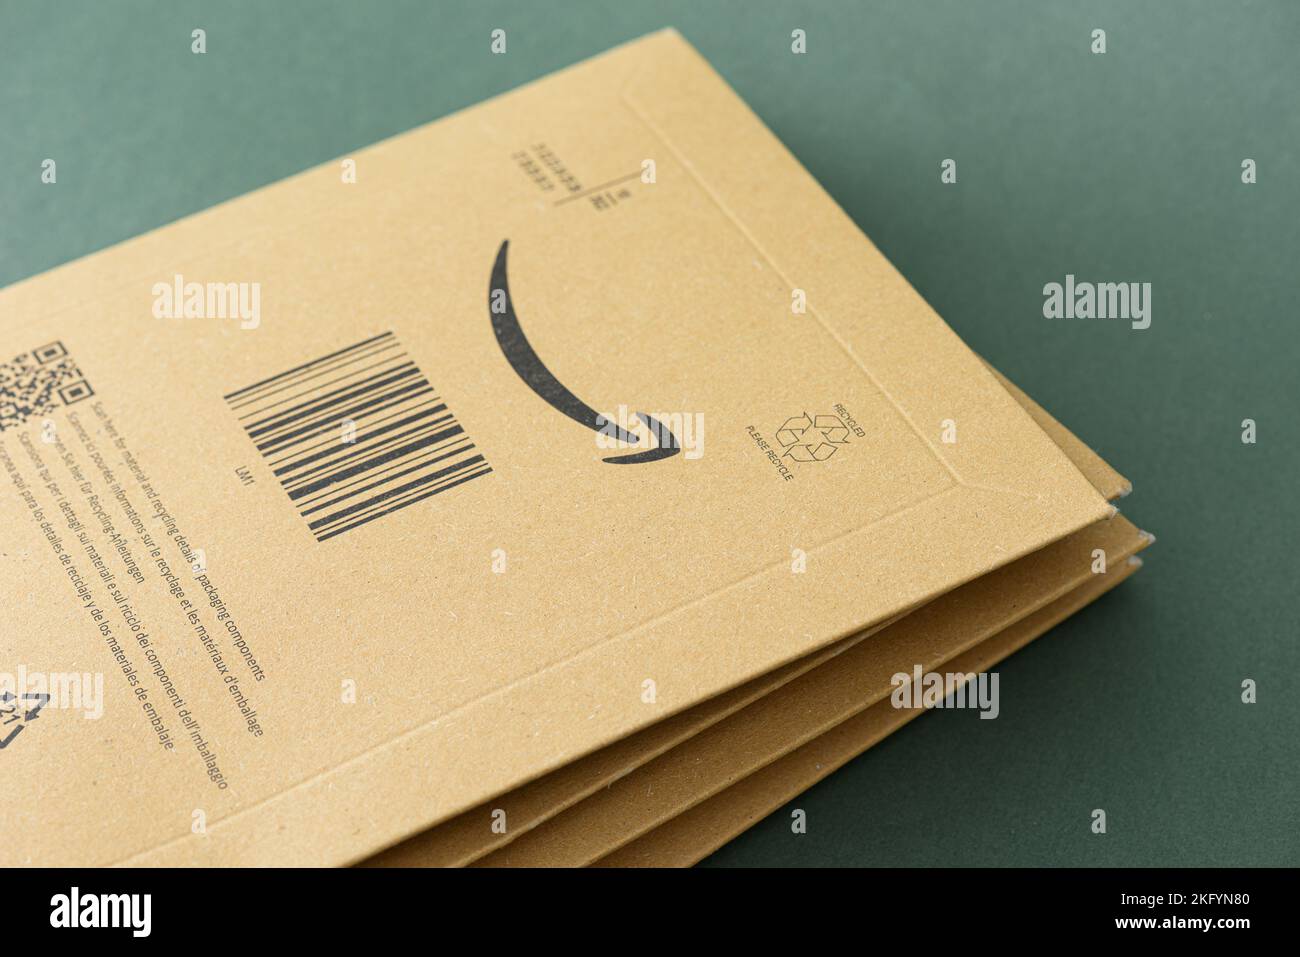 ISTANBUL, TURKEY - NOVEMBER 20, 2022: Amazon logo with sign arrow smiling printed on delivery envelope brown cardboard. Stock Photo